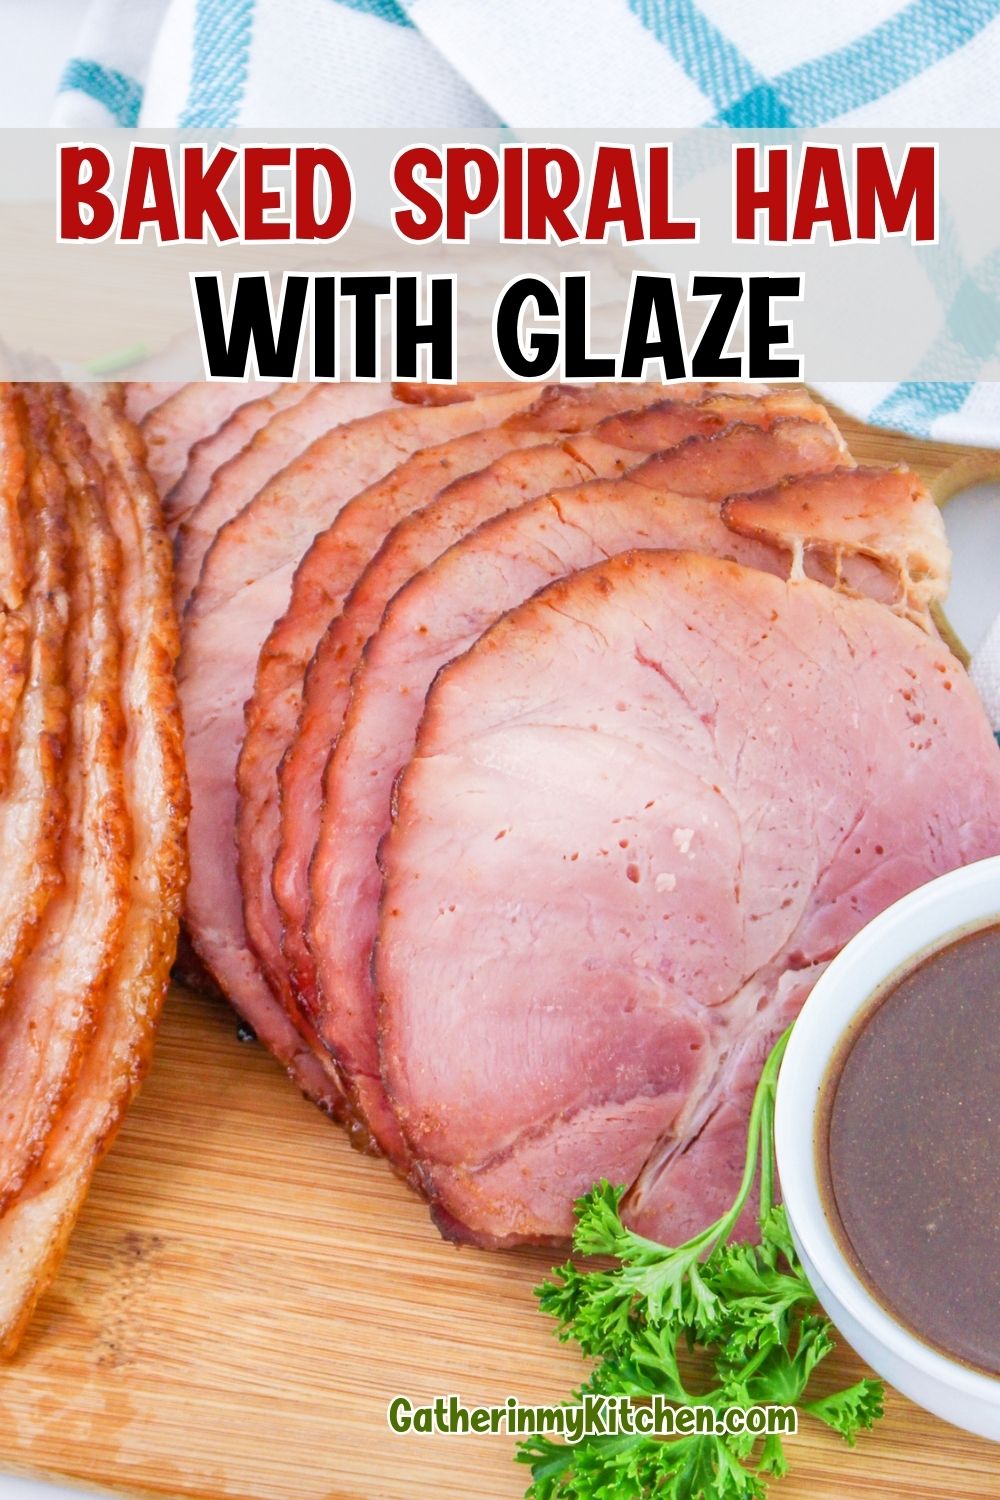 Pin Image: Slices of ham on a cutting board with the words "Baked Spiral Ham with Glaze" overlaid.